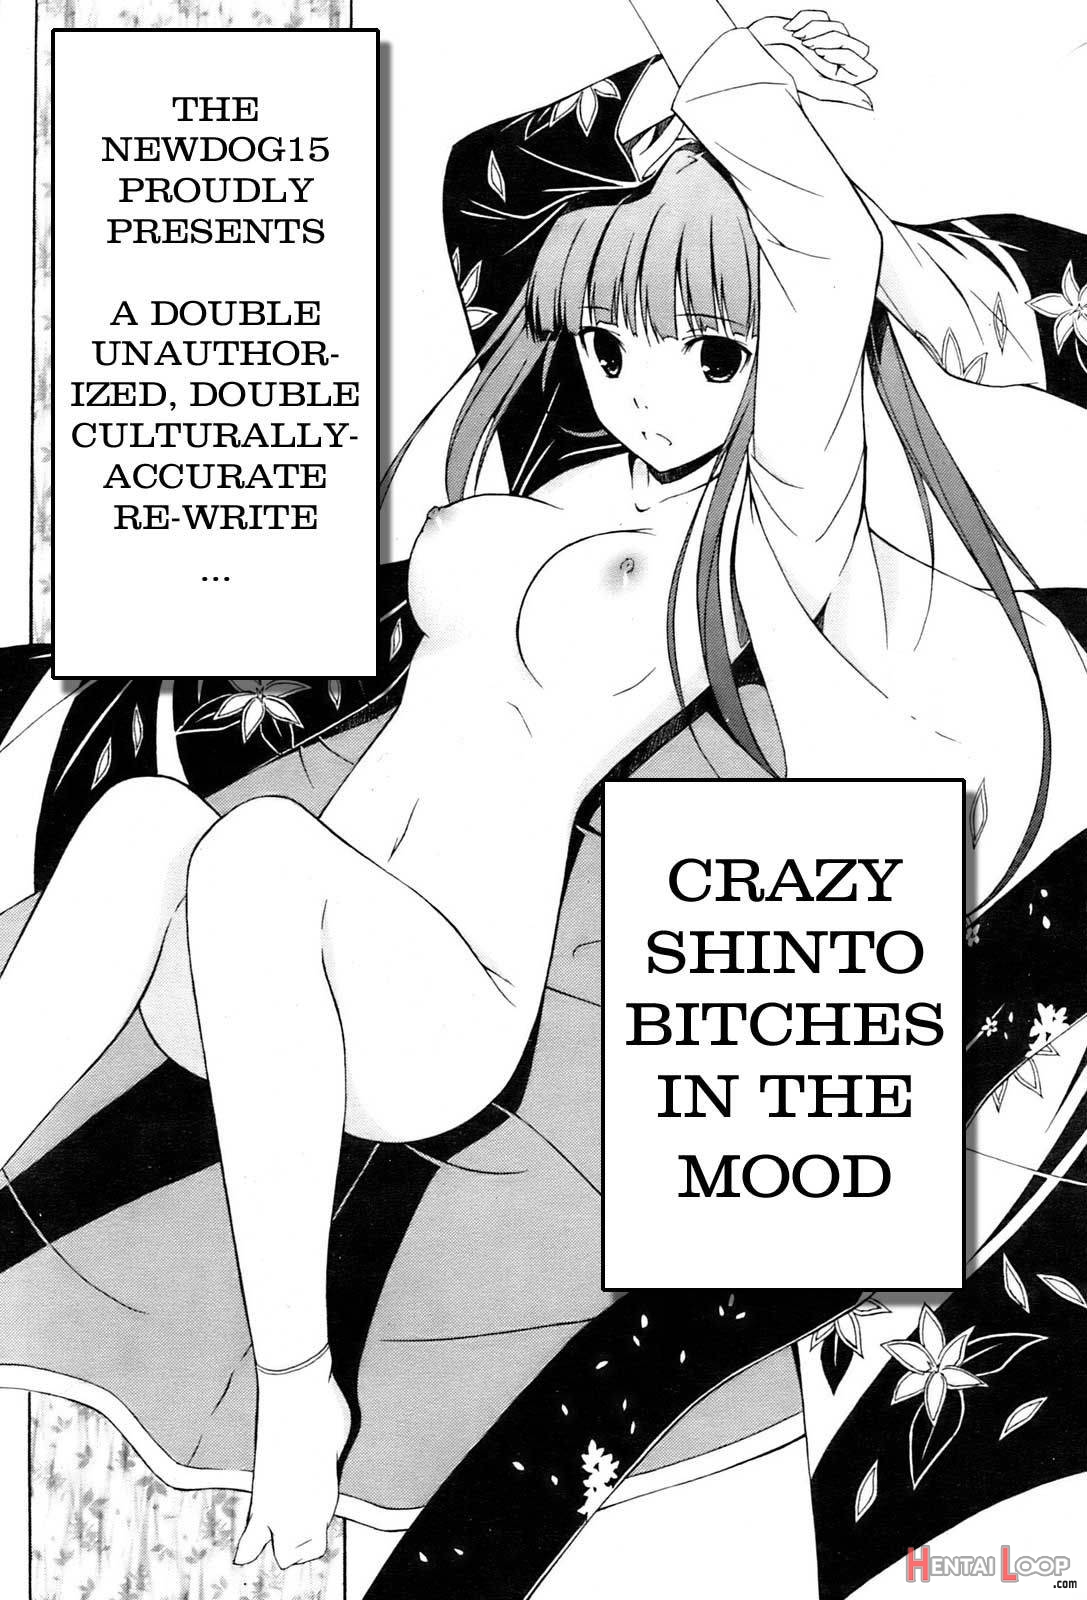 Crazy Shinto Bitches in the Mood page 2